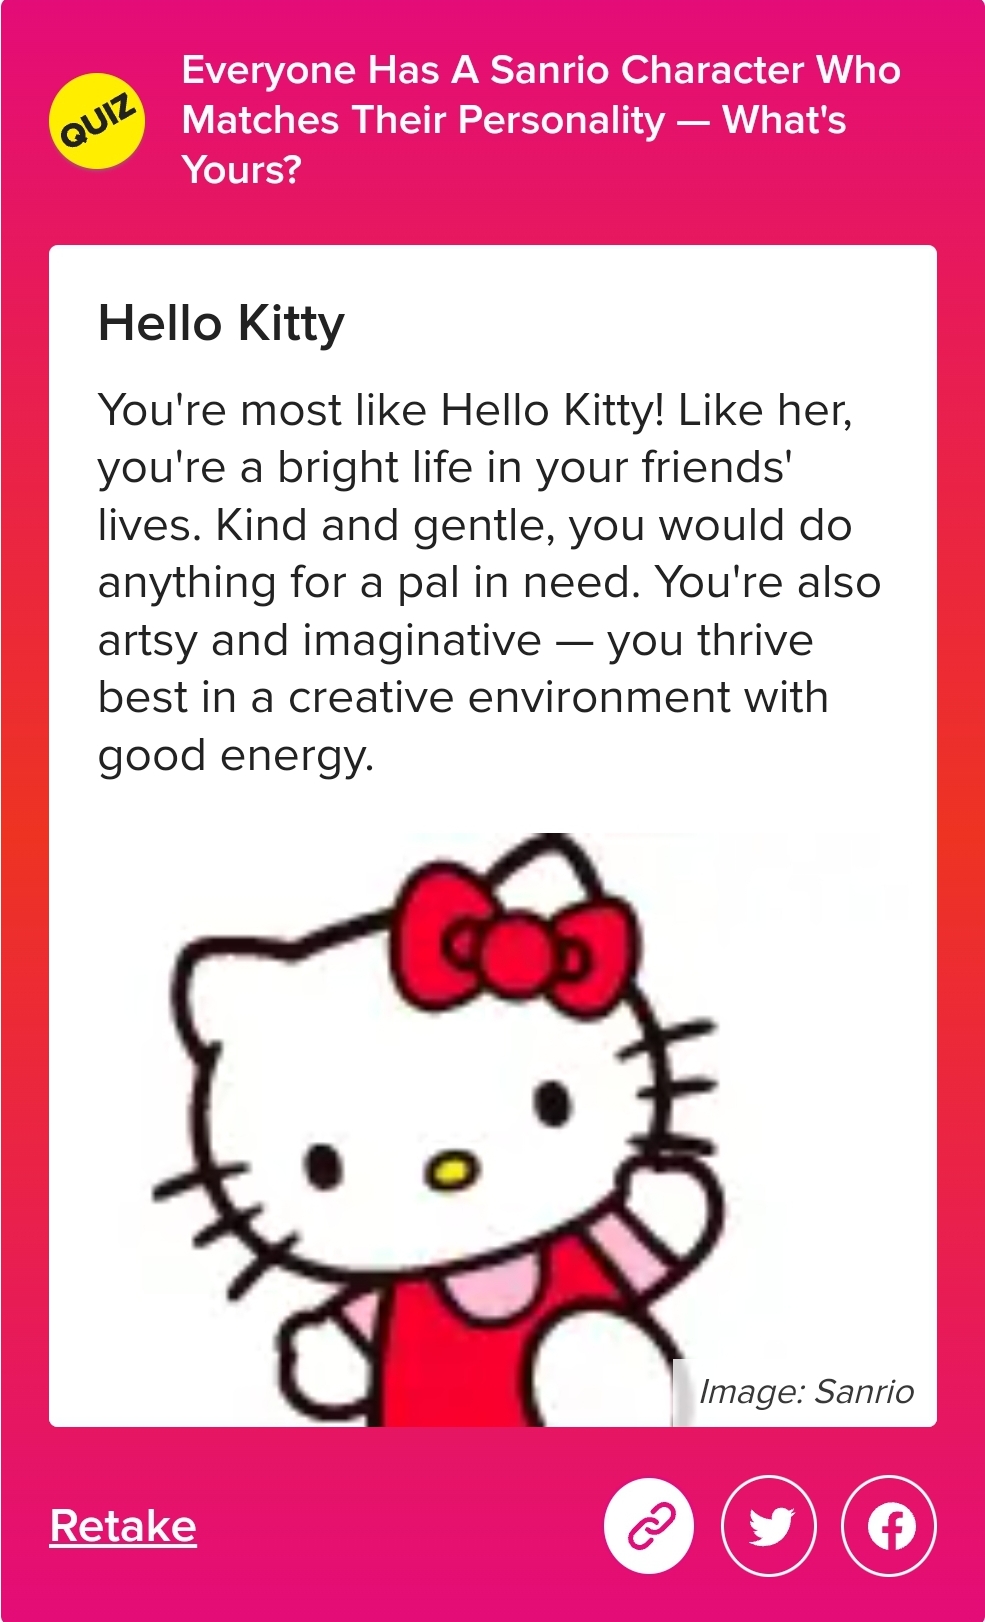 You're most like Hello Kitty!